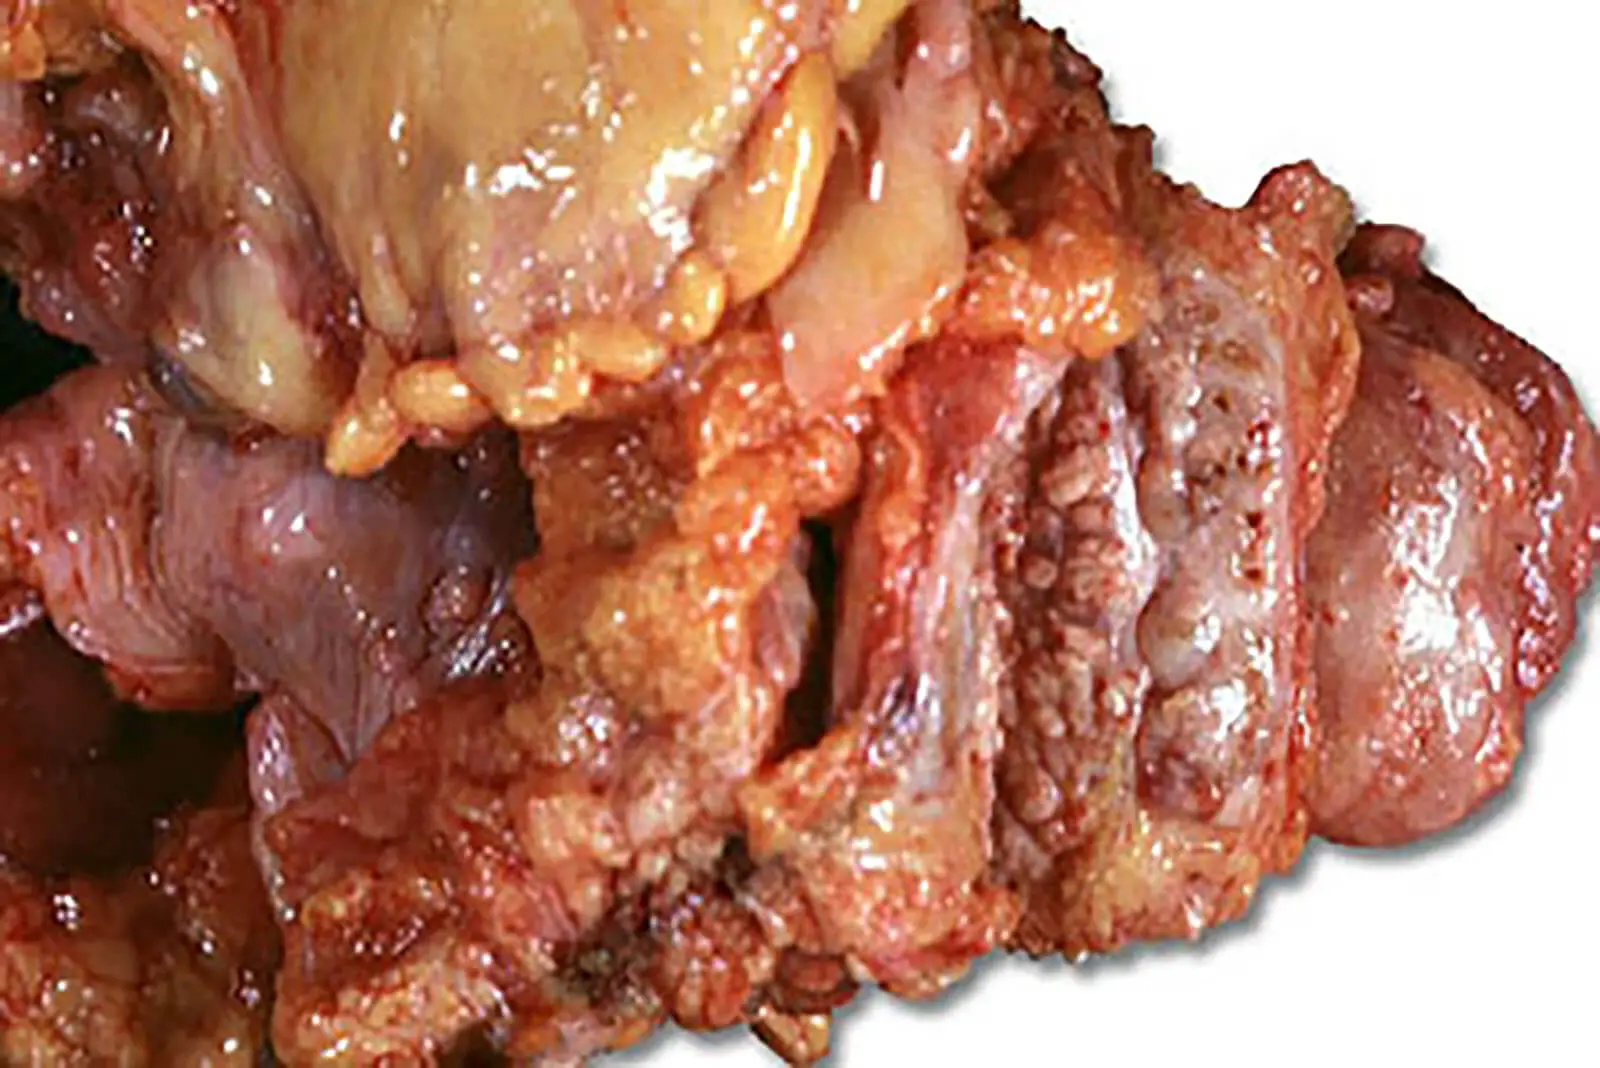 Photo Of A Prostate Cancer Tumor On A Prostate Gland